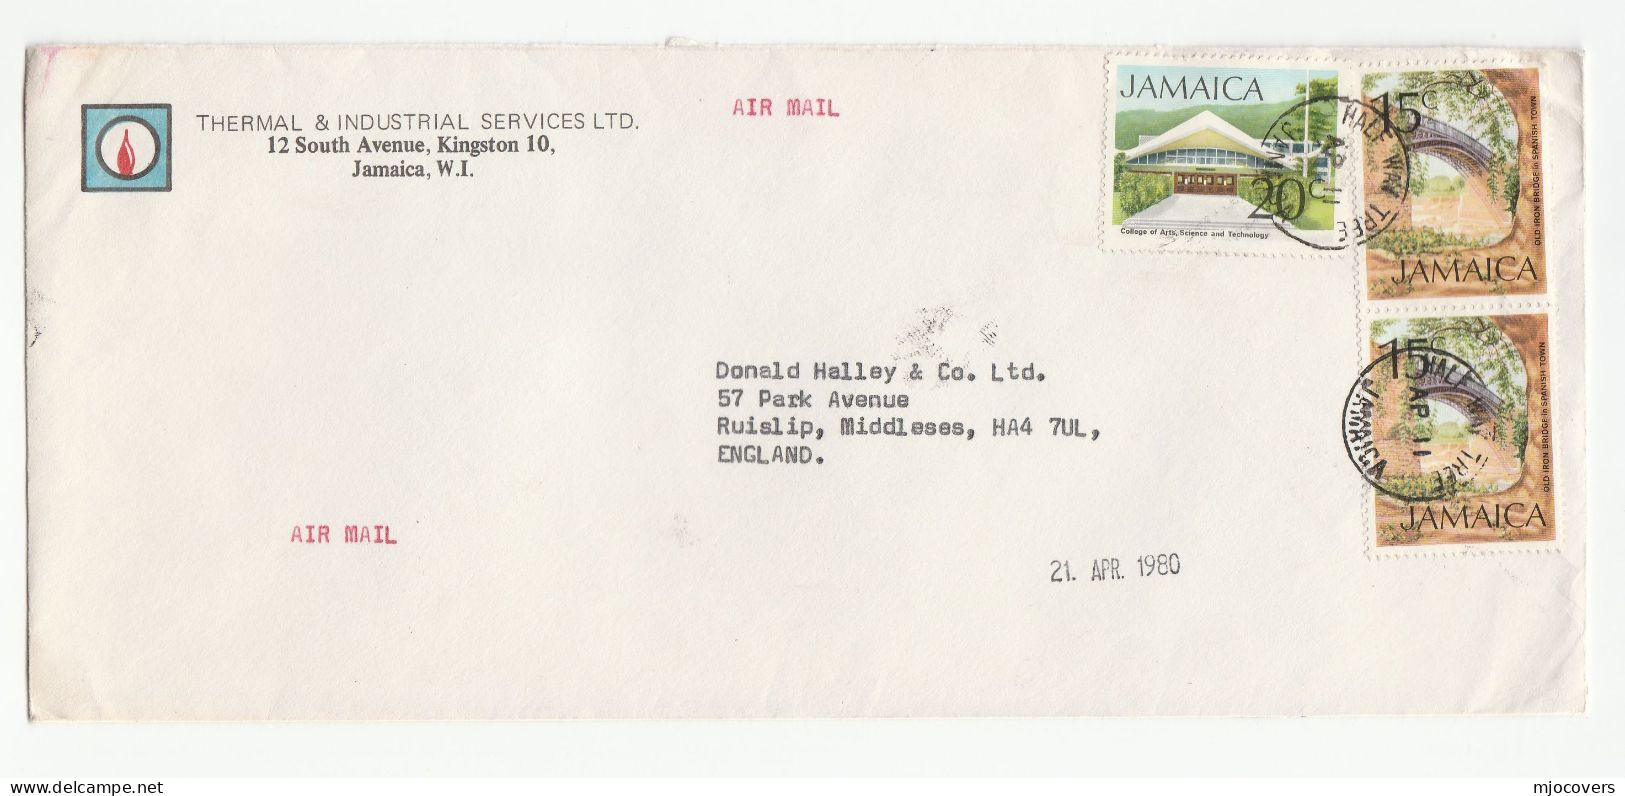 THERMAL ENERGY FLAME Air Mail JAMAICA  1980 Illus ADVERT Cover  Stamps Half Way Tree To GB Energy - Jamaica (1962-...)